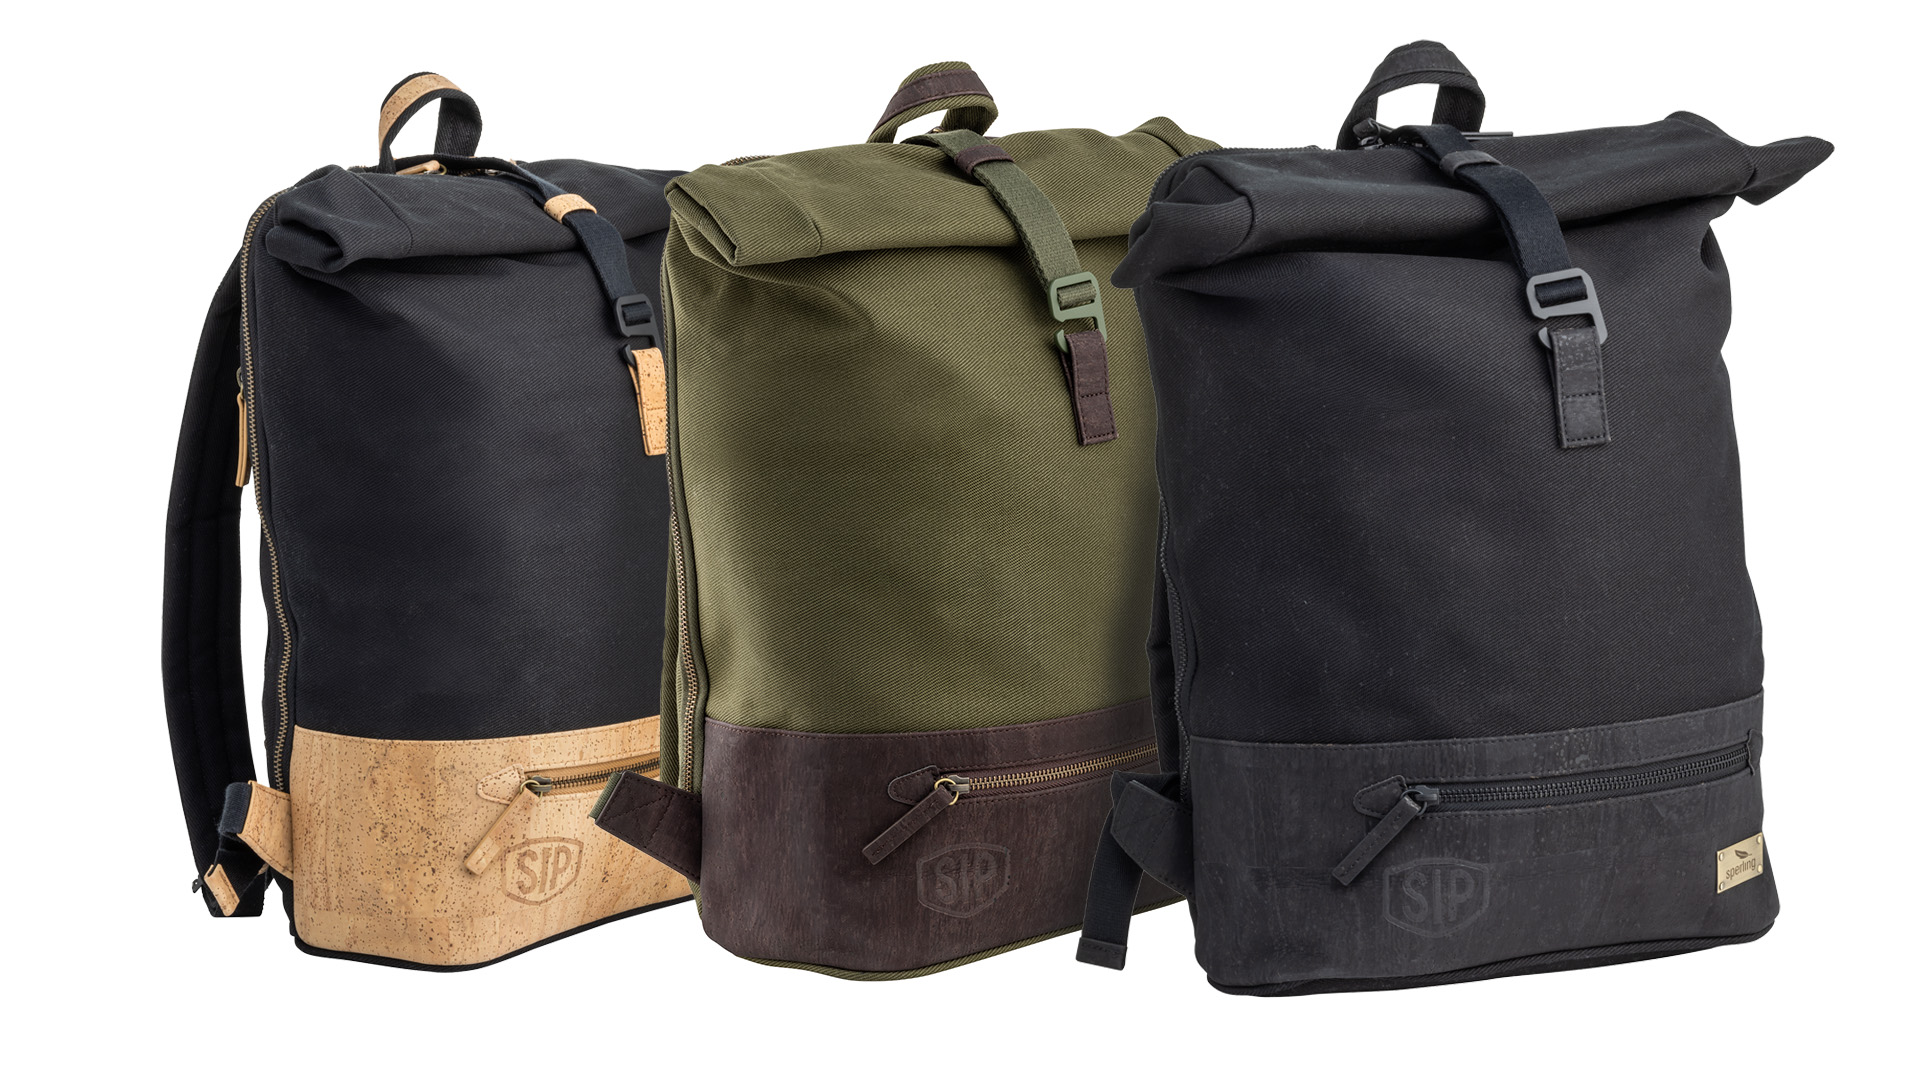 Stylish and practical – the Vespa backpack from SIP